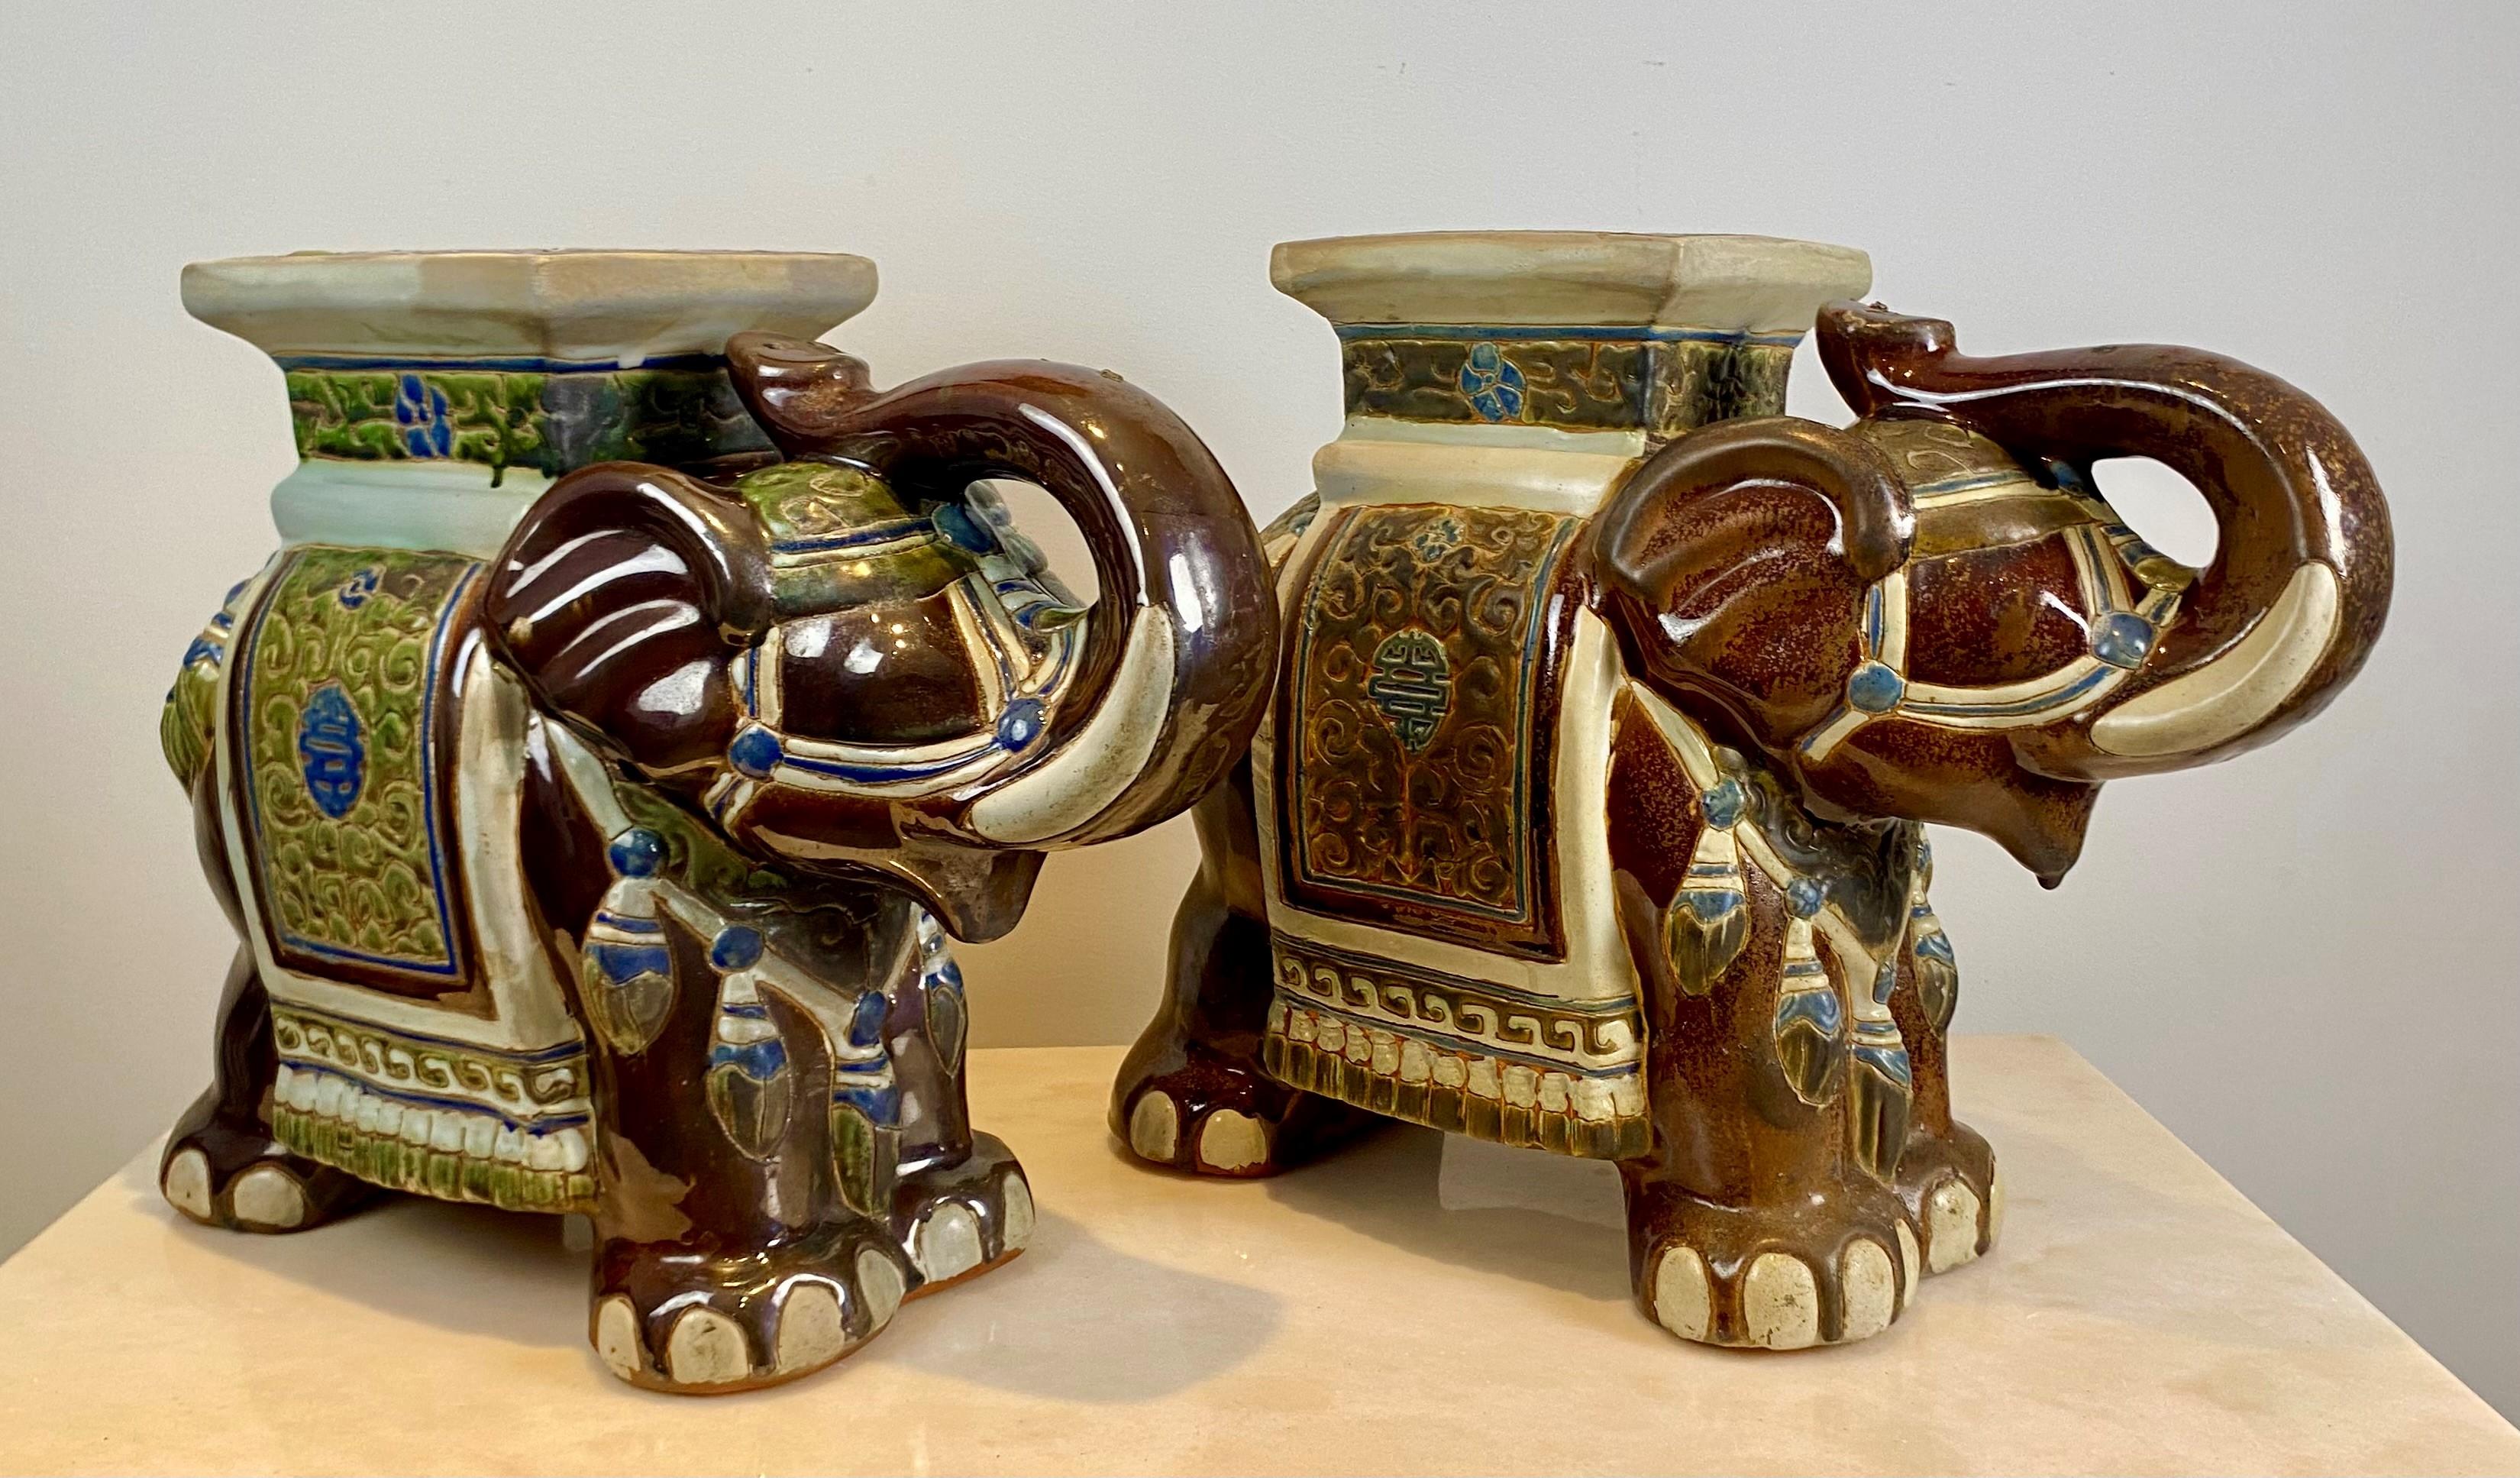 Pair of brown glazed ceramic elephants, garden stools or plant holders, China  For Sale 8